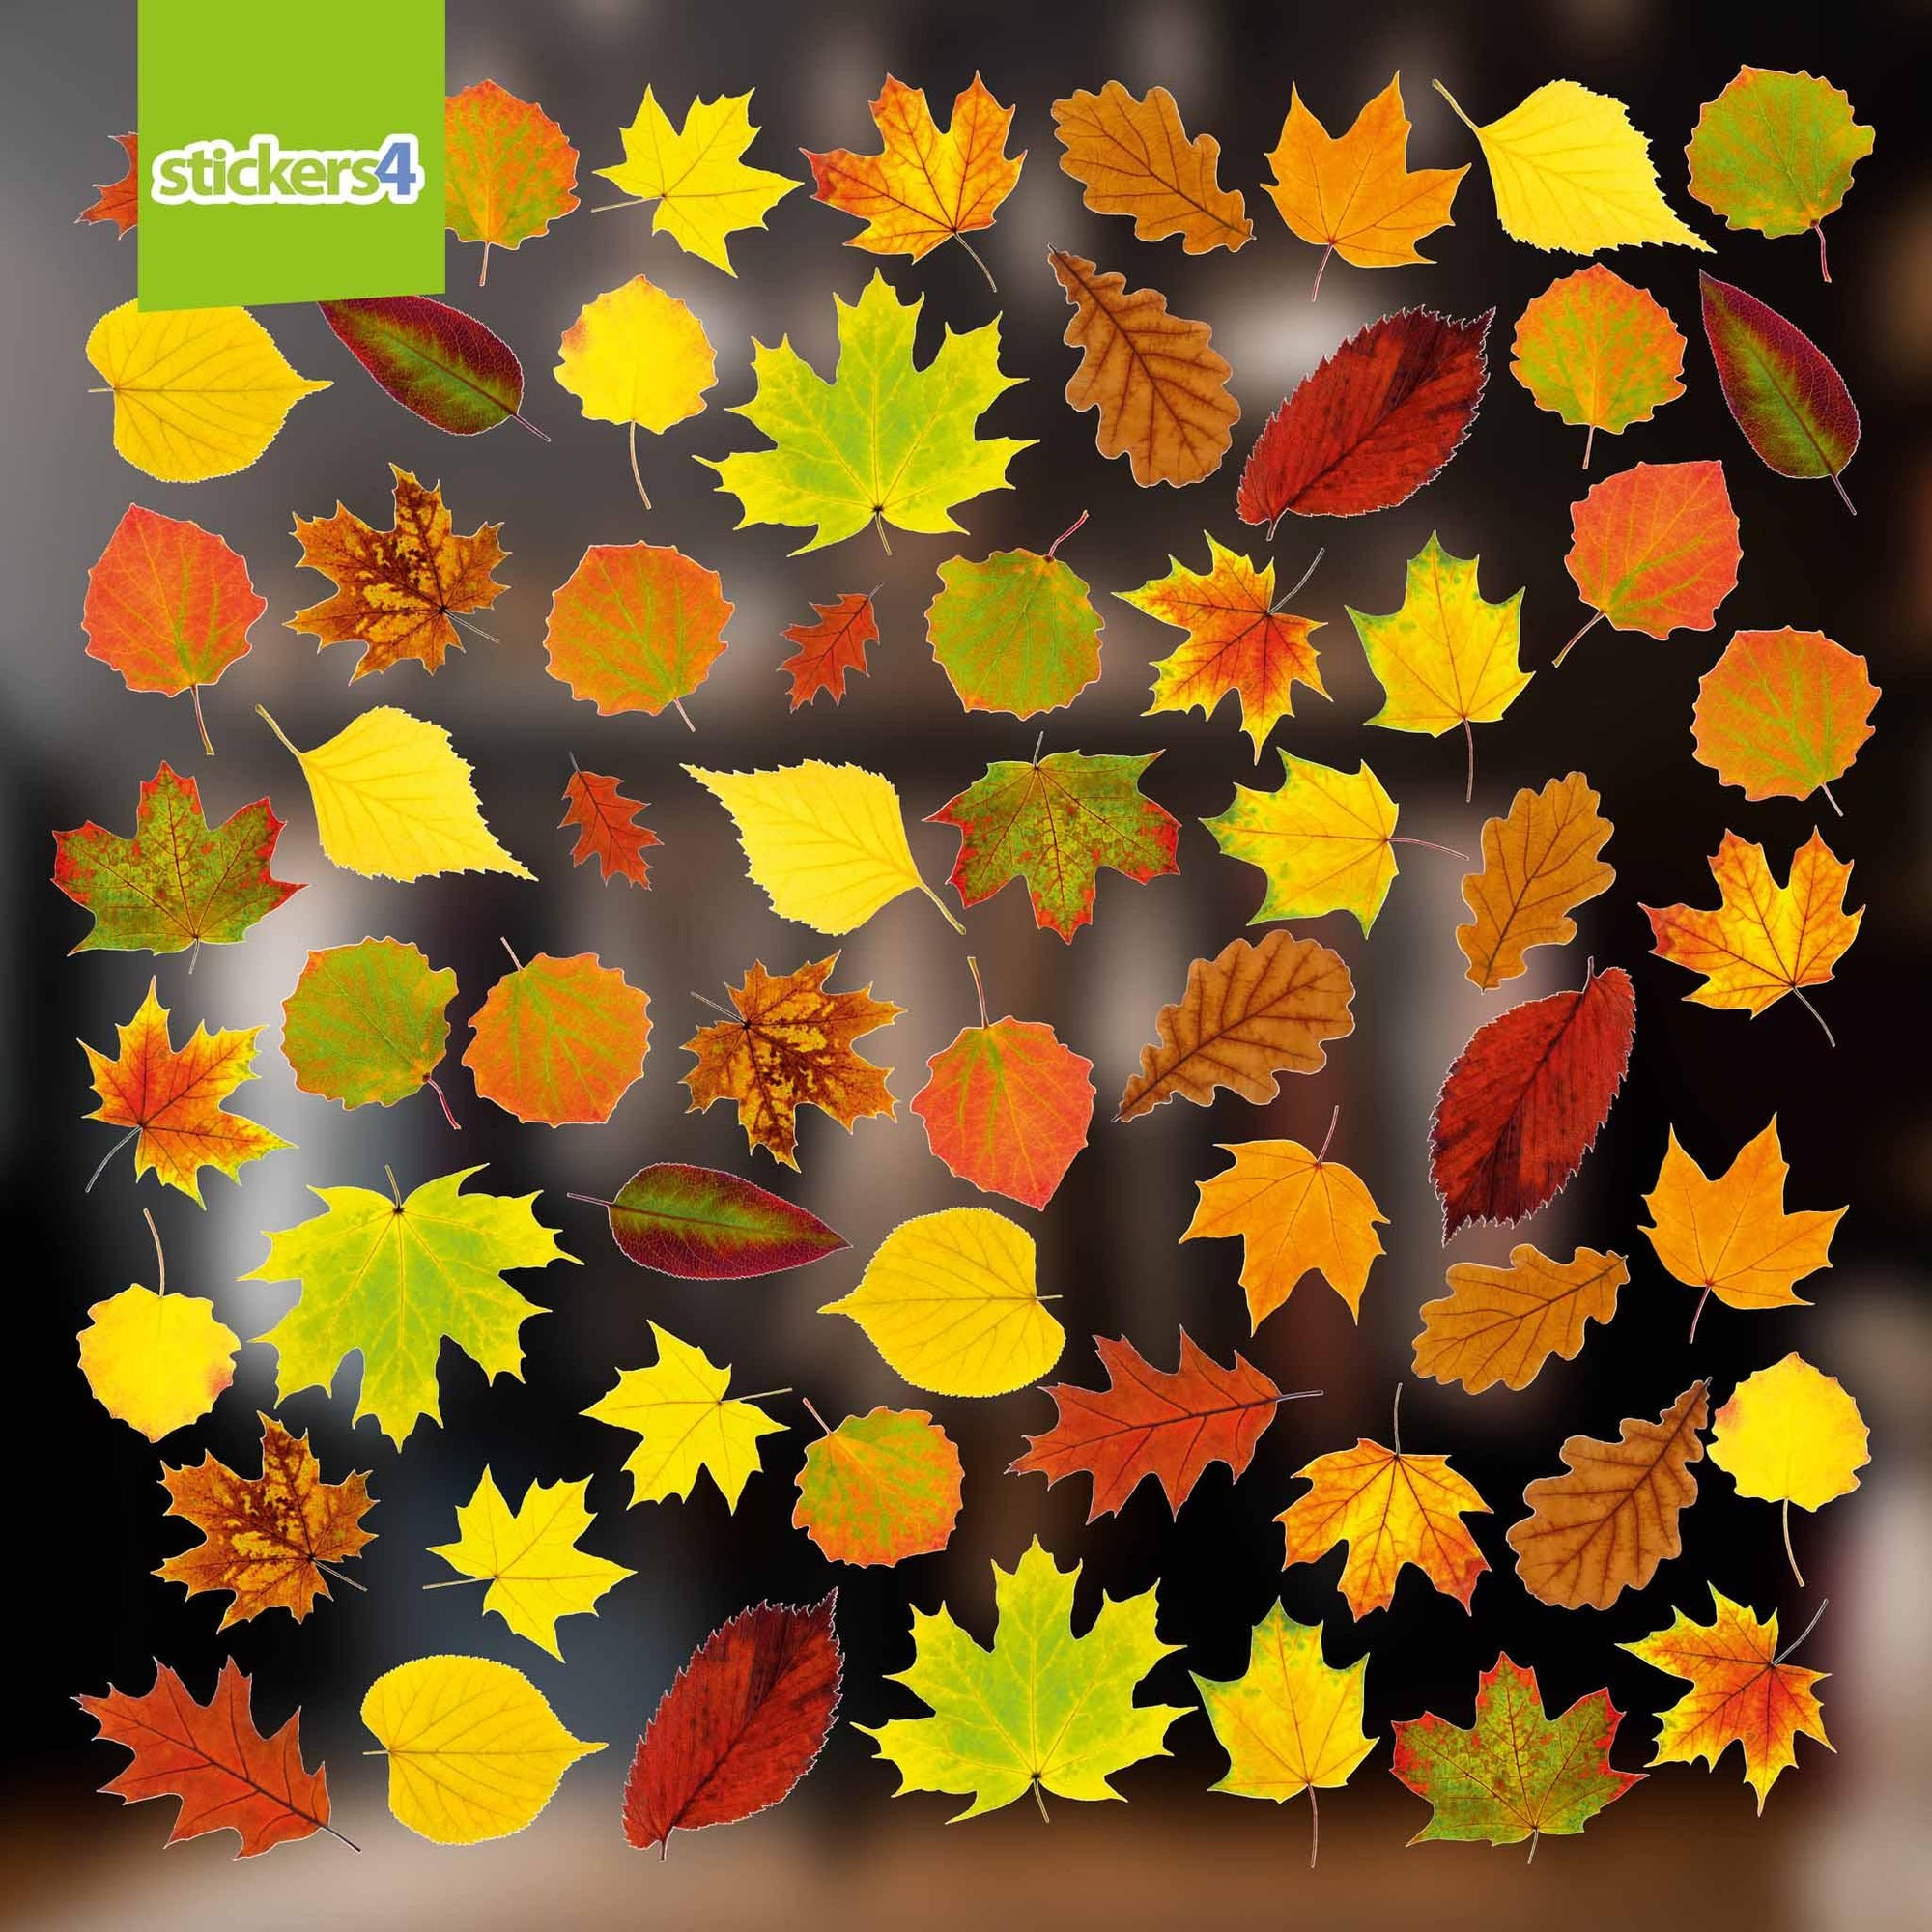 Photorealistic Autumn Leaves Shop Window Stickers - Pack 3 Autumn Window Display